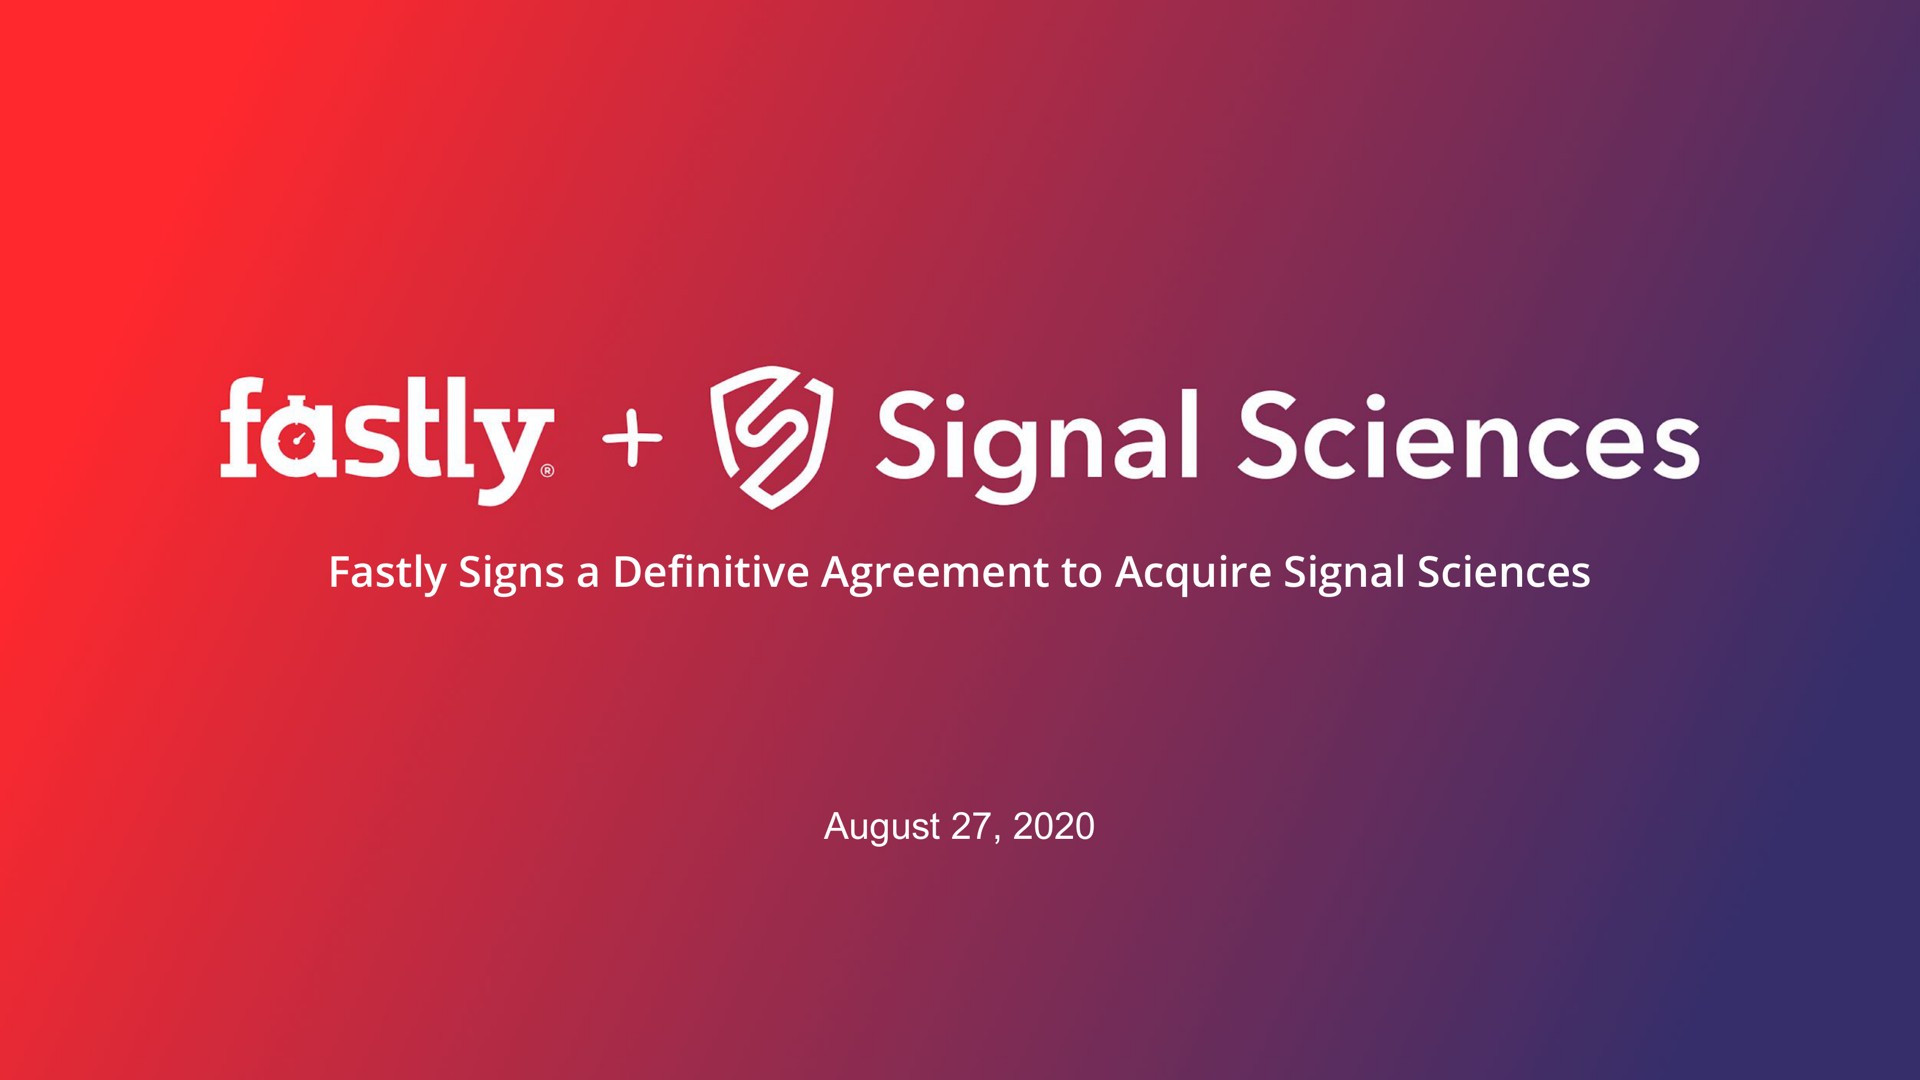 signal sciences | Fastly